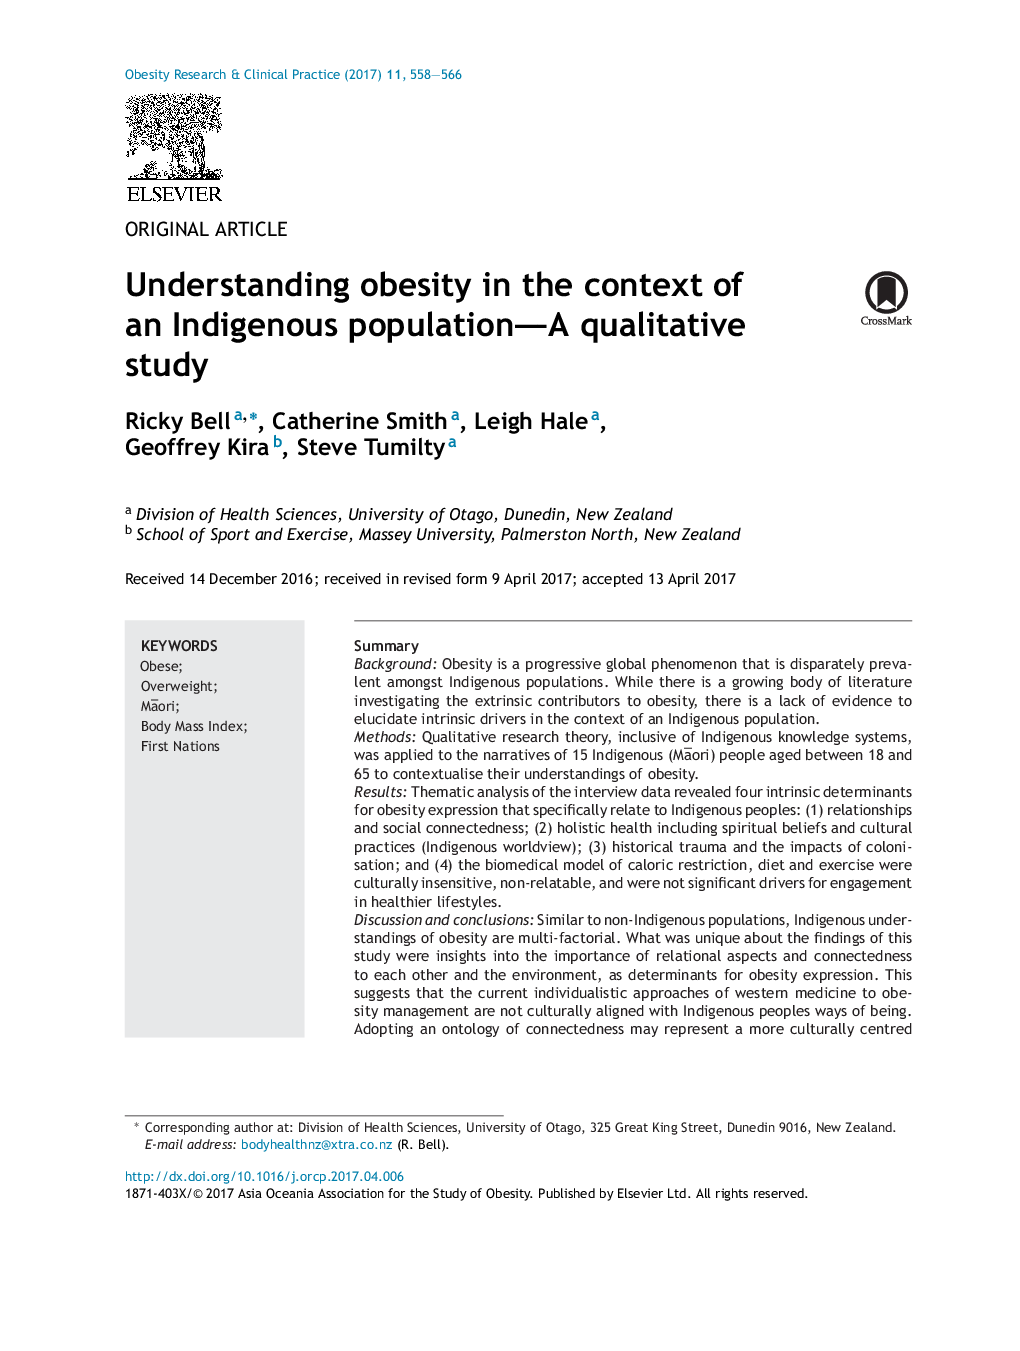 Original ArticleUnderstanding obesity in the context of an Indigenous population-A qualitative study